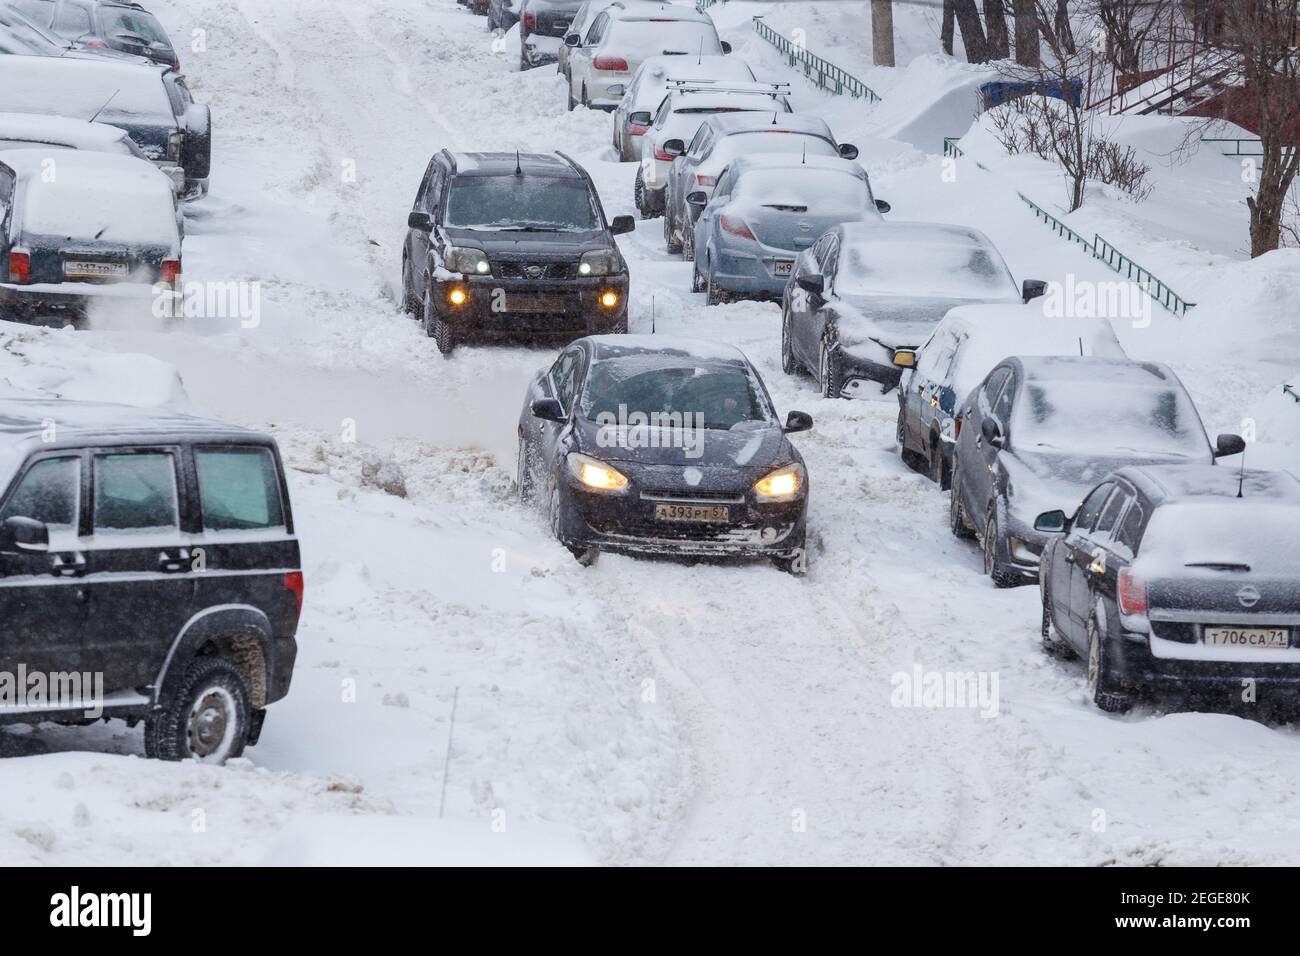 Tula, Russia - February 13, 2021: Two cars drive through a snowy yard between rows of parked cars in deep snow. Stock Photo